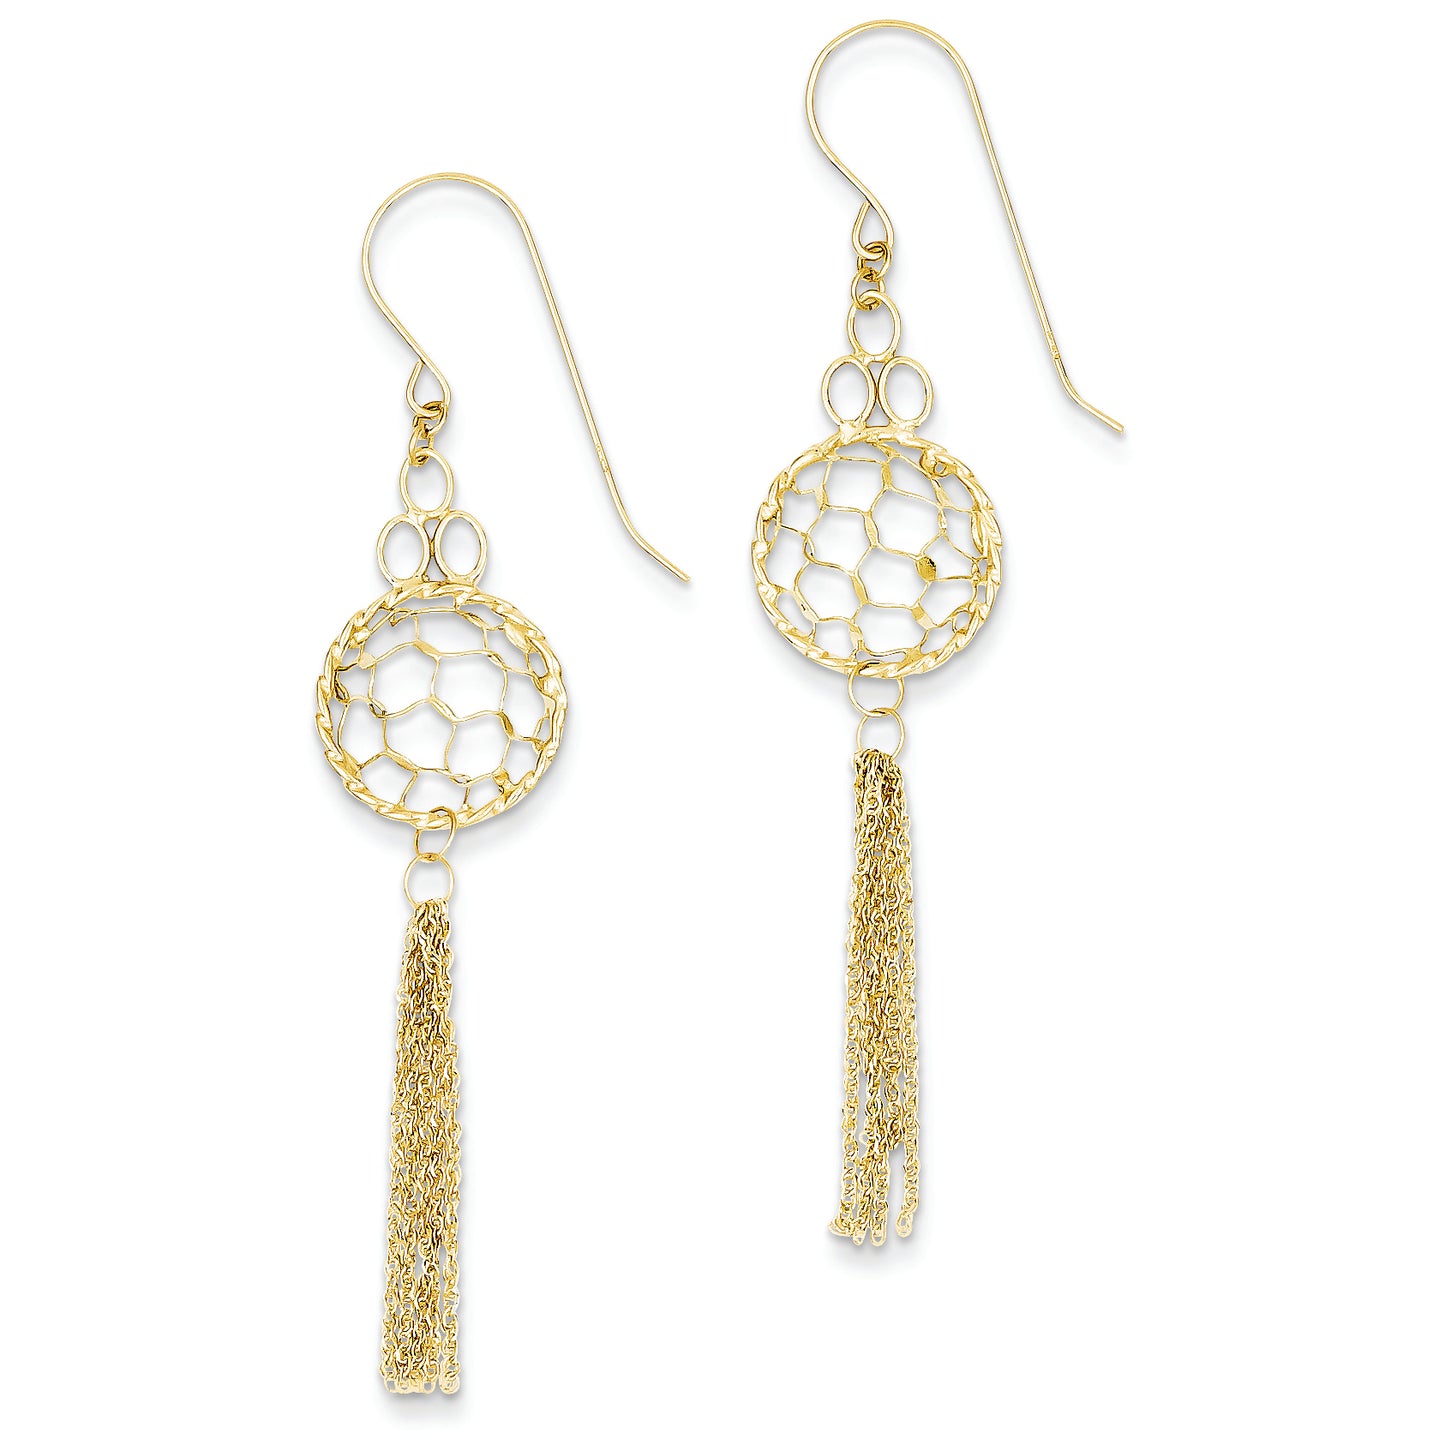 14K Gold Honeycomb Cage with Tassels Dangle Earrings